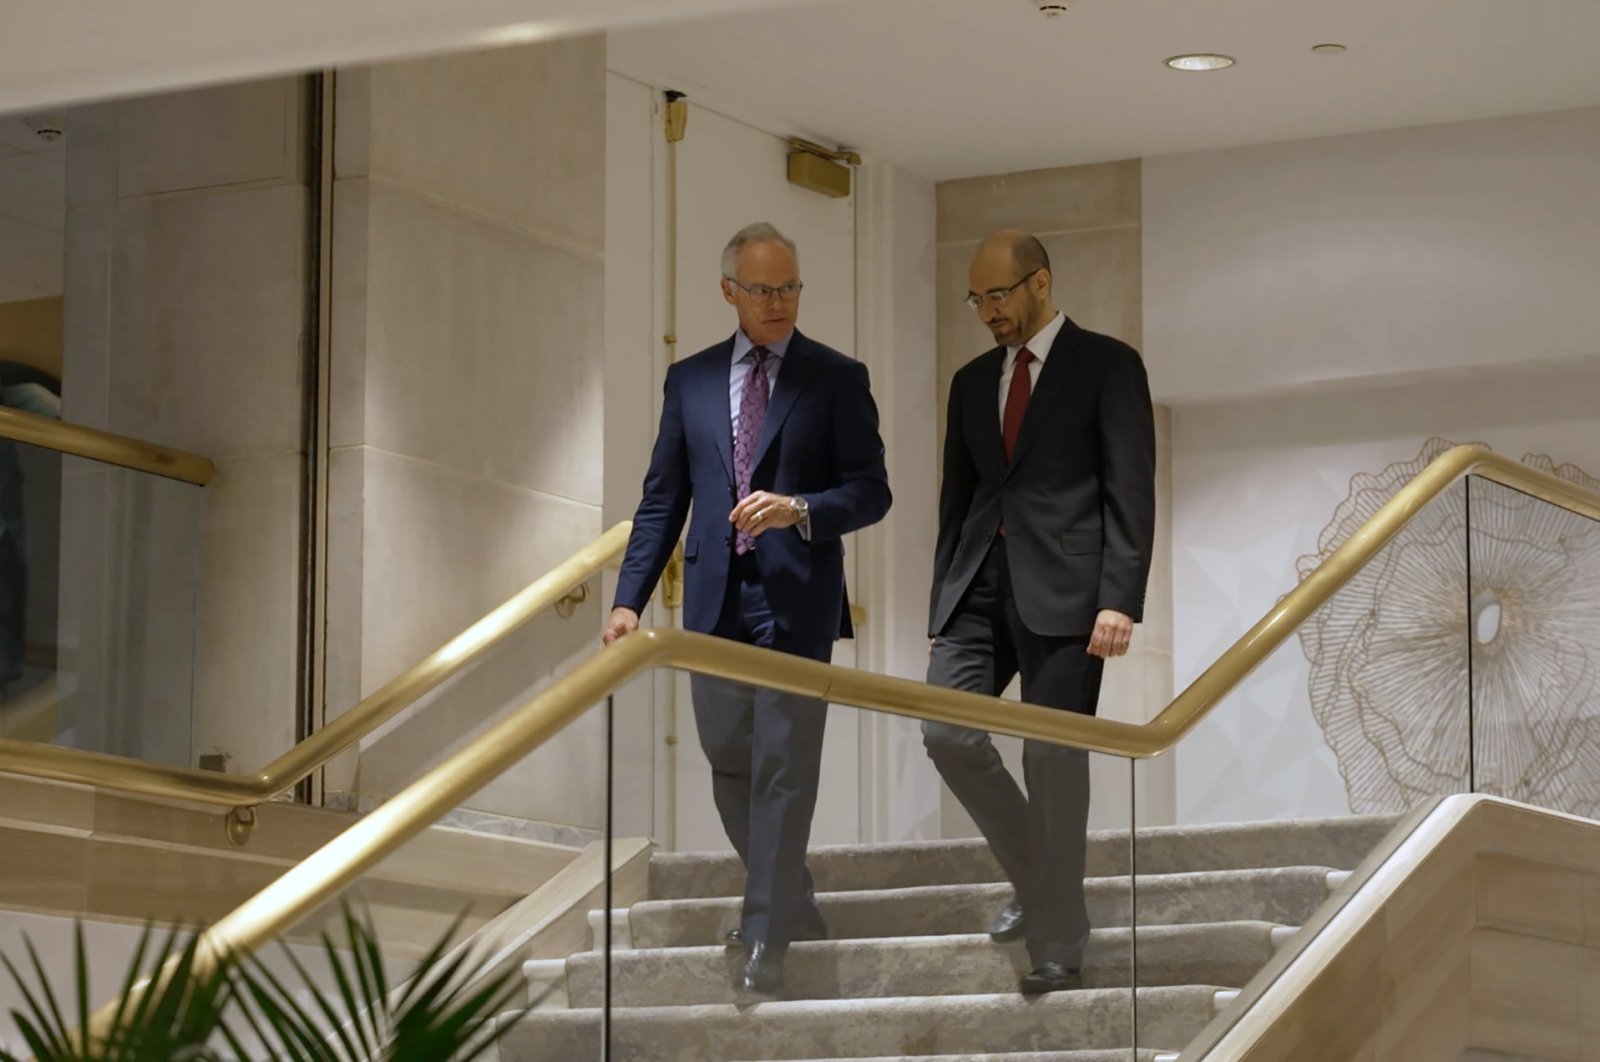 In this summer 2021 photo provided by CBS News, former senior Saudi security official Saad al-Jabri (R) walks with journalist Scott Pelley in Washington during an interview for "60 Minutes." (CBS News/60 Minutes via AP)